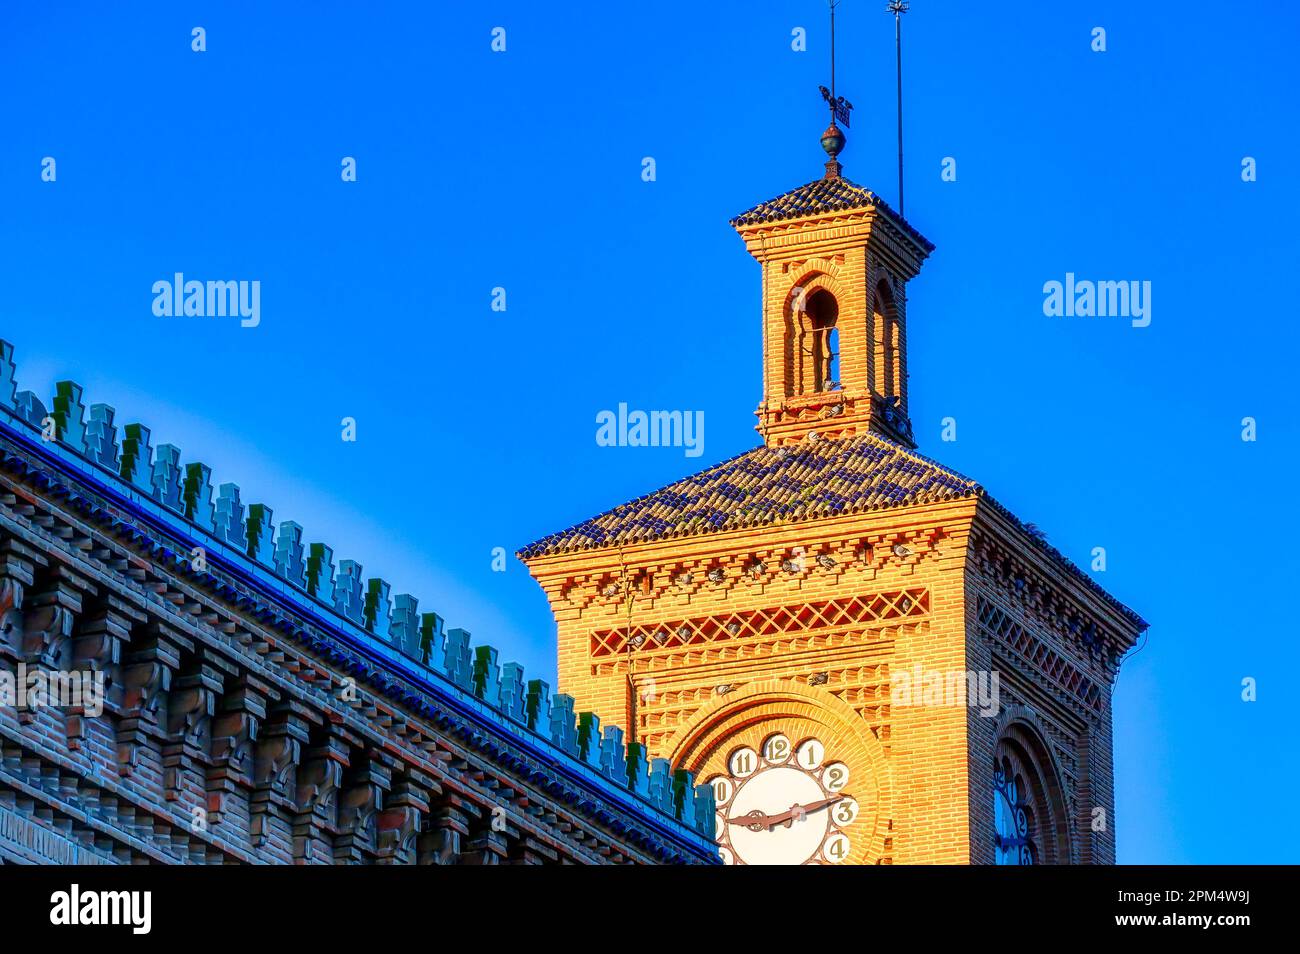 Clock tower building exterior. Old antique architecture of the Toledo AVE station. The transportation building is a famous place and tourist attractio Stock Photo